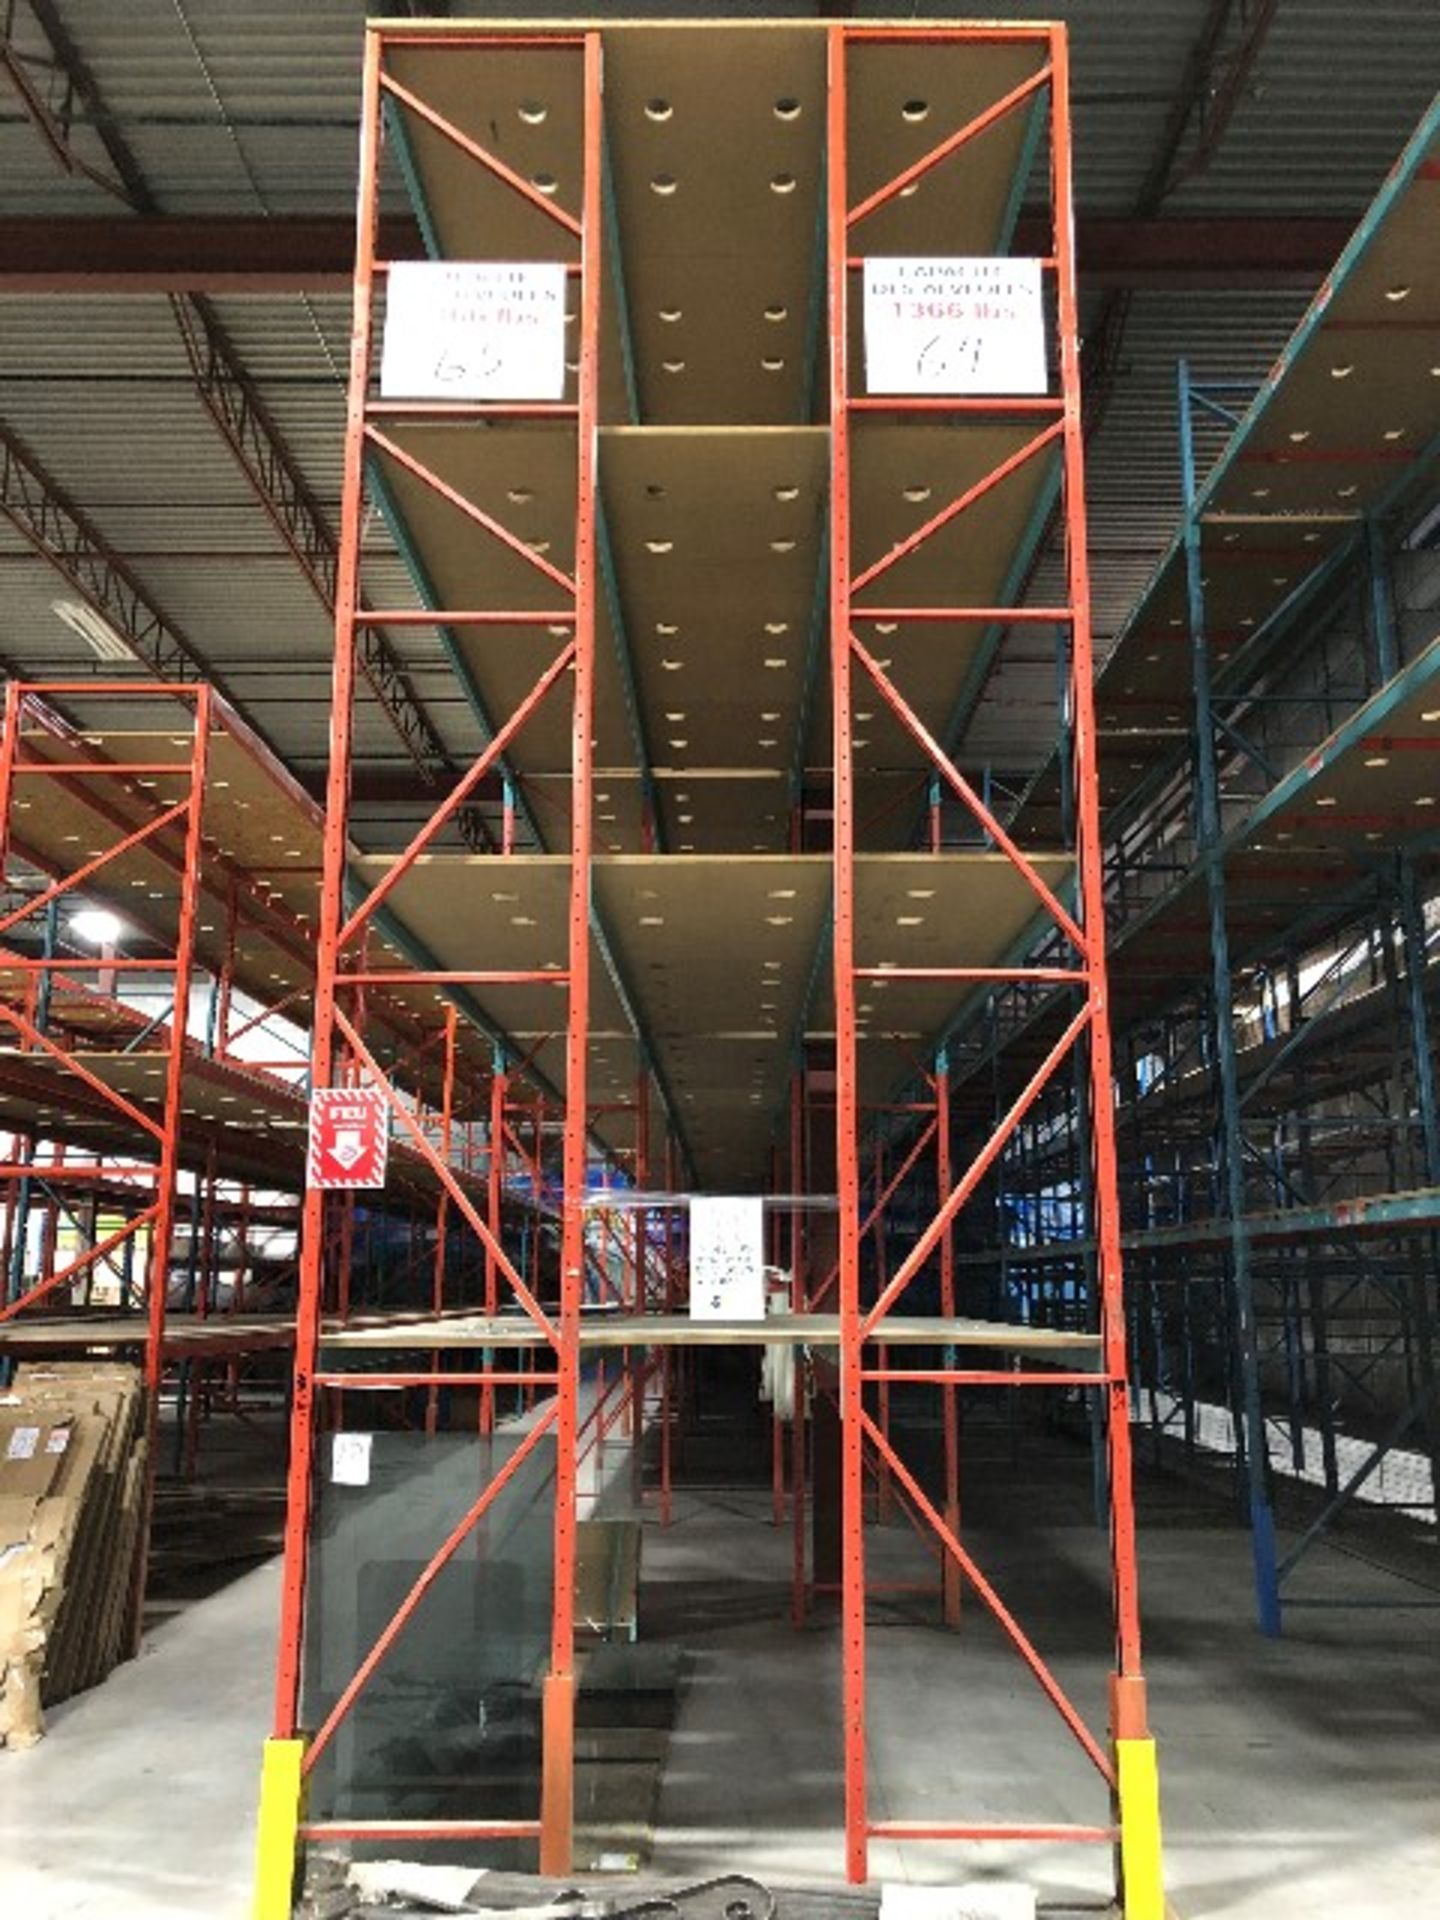 Pallet racking: H.20'xW.33”,108pcs 12'long bars w/57 MDF sheets,14 sections